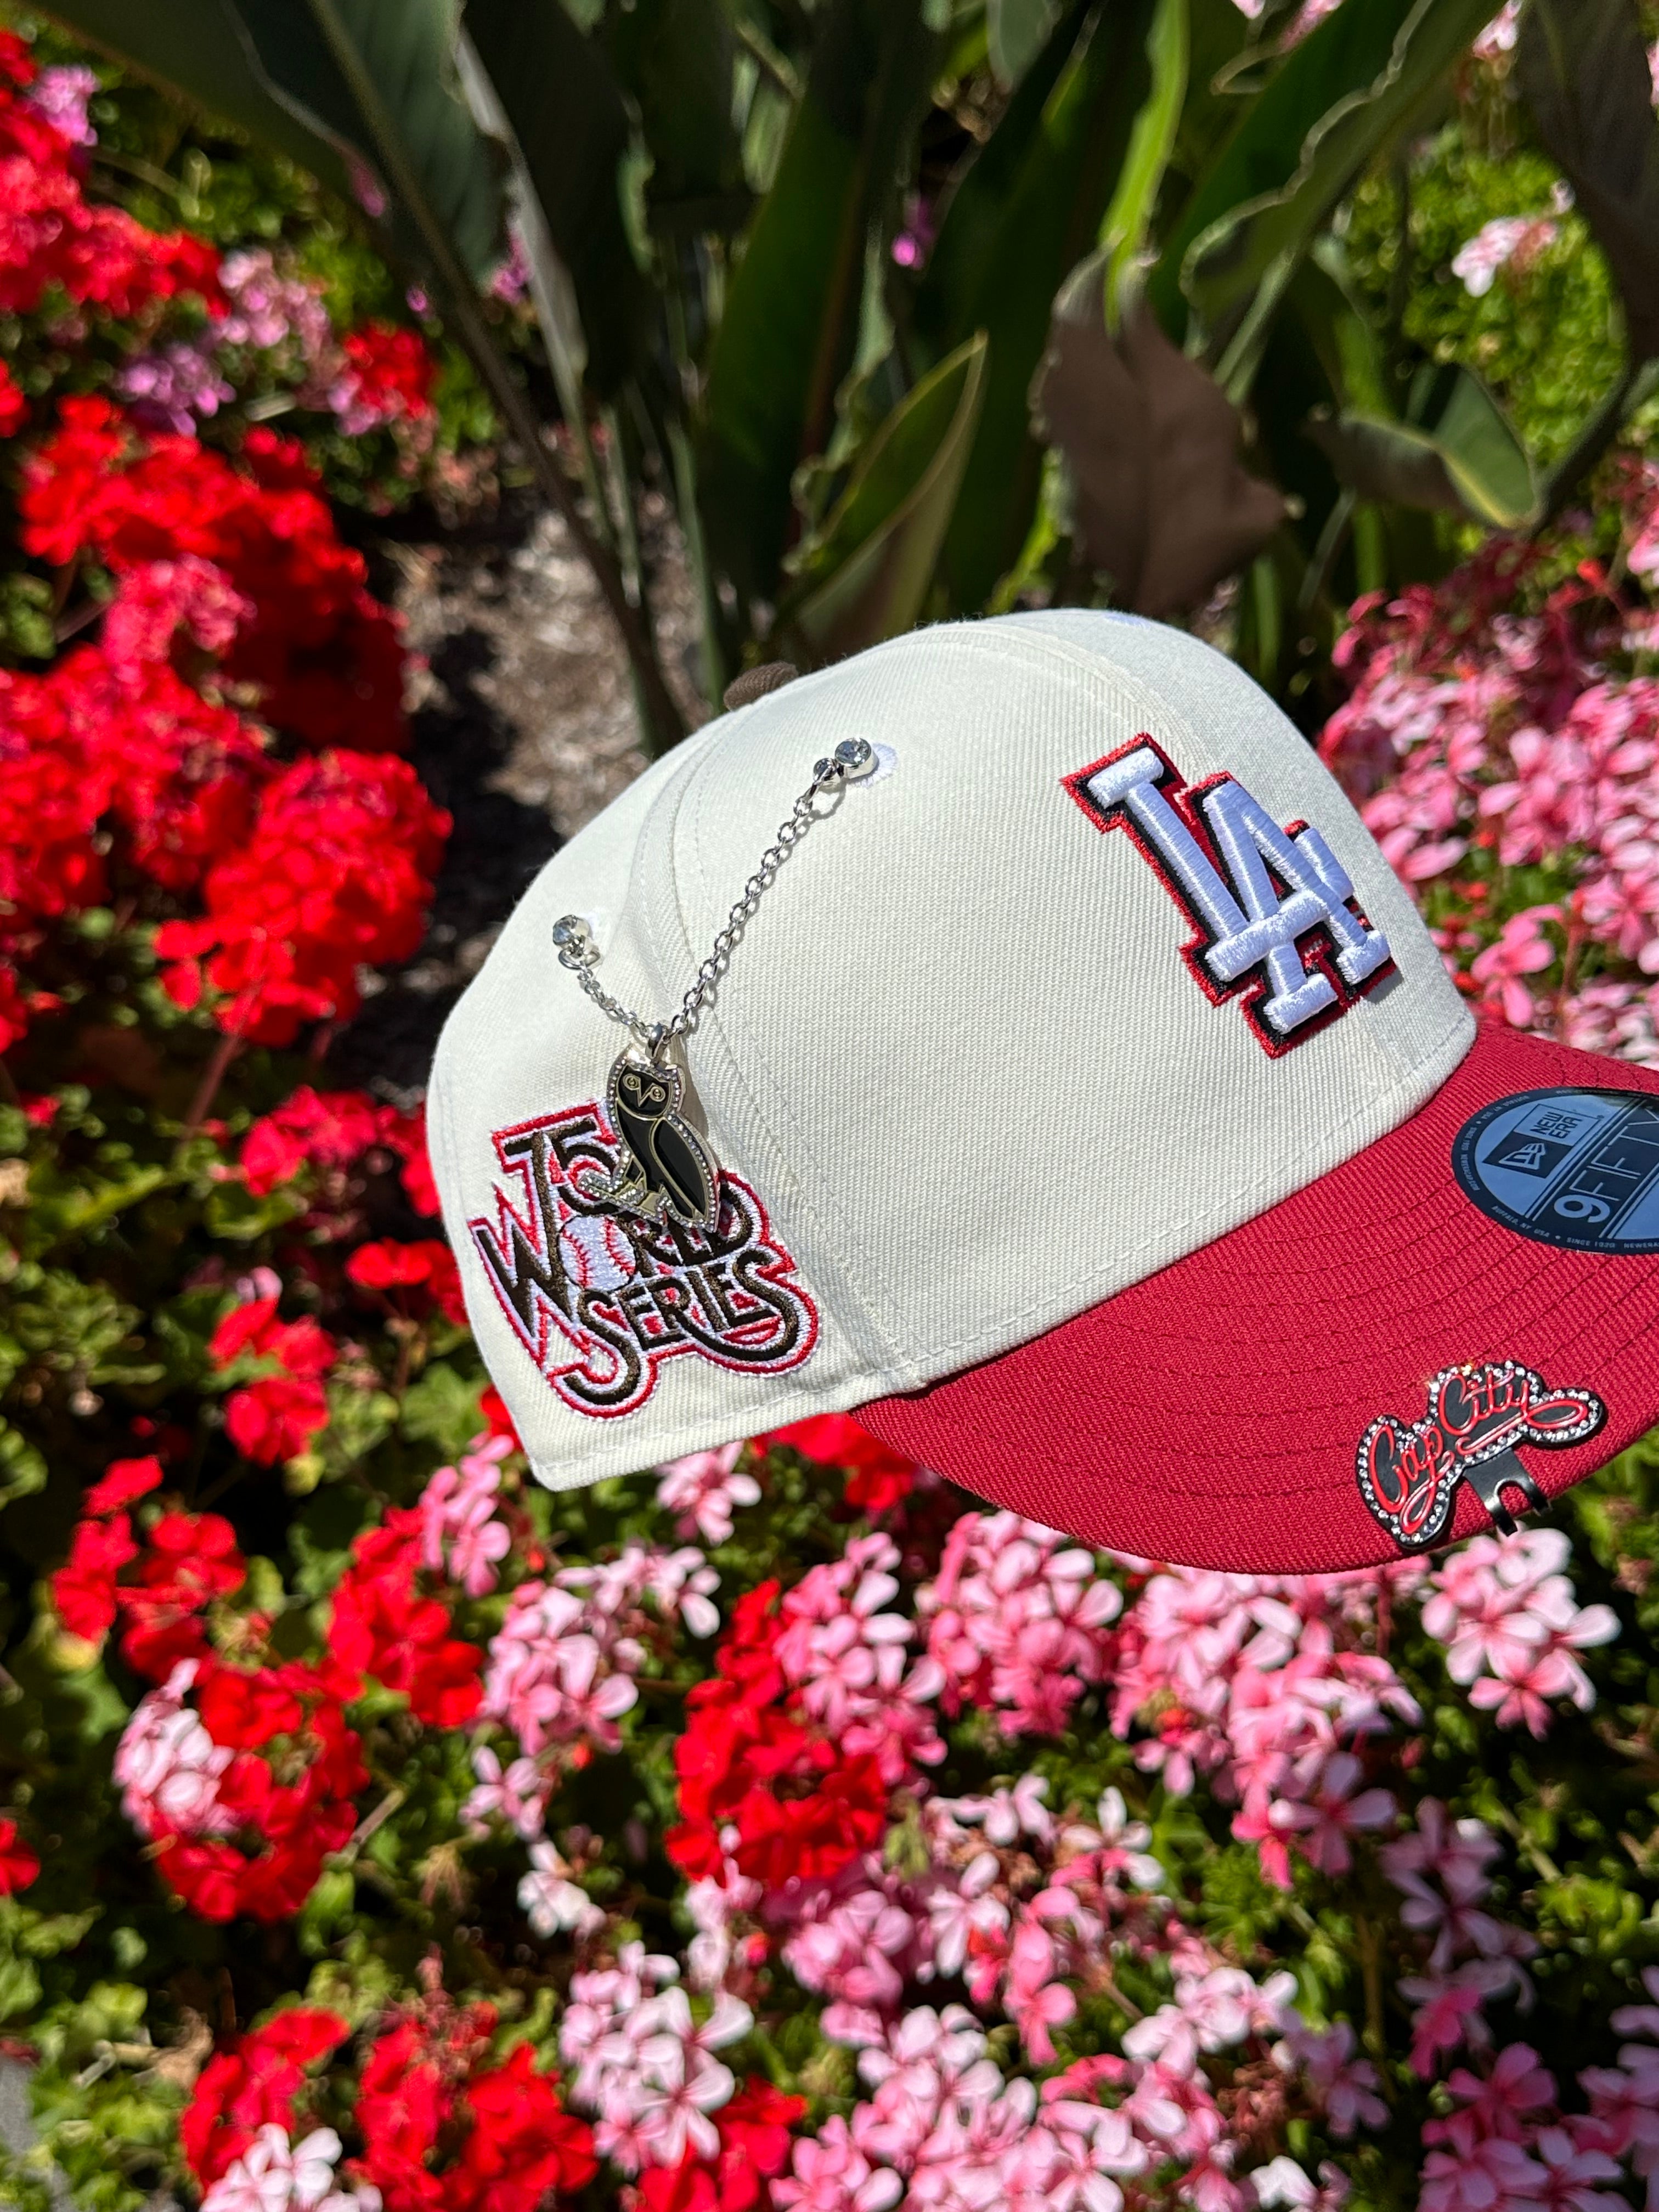 NEW ERA EXCLUSIVE 9FIFTY CHROME WHITE/MAROON RED LOS ANGELES DODGERS SNAPBACK W/ 75TH WORLD SERIES SIDE PATCH